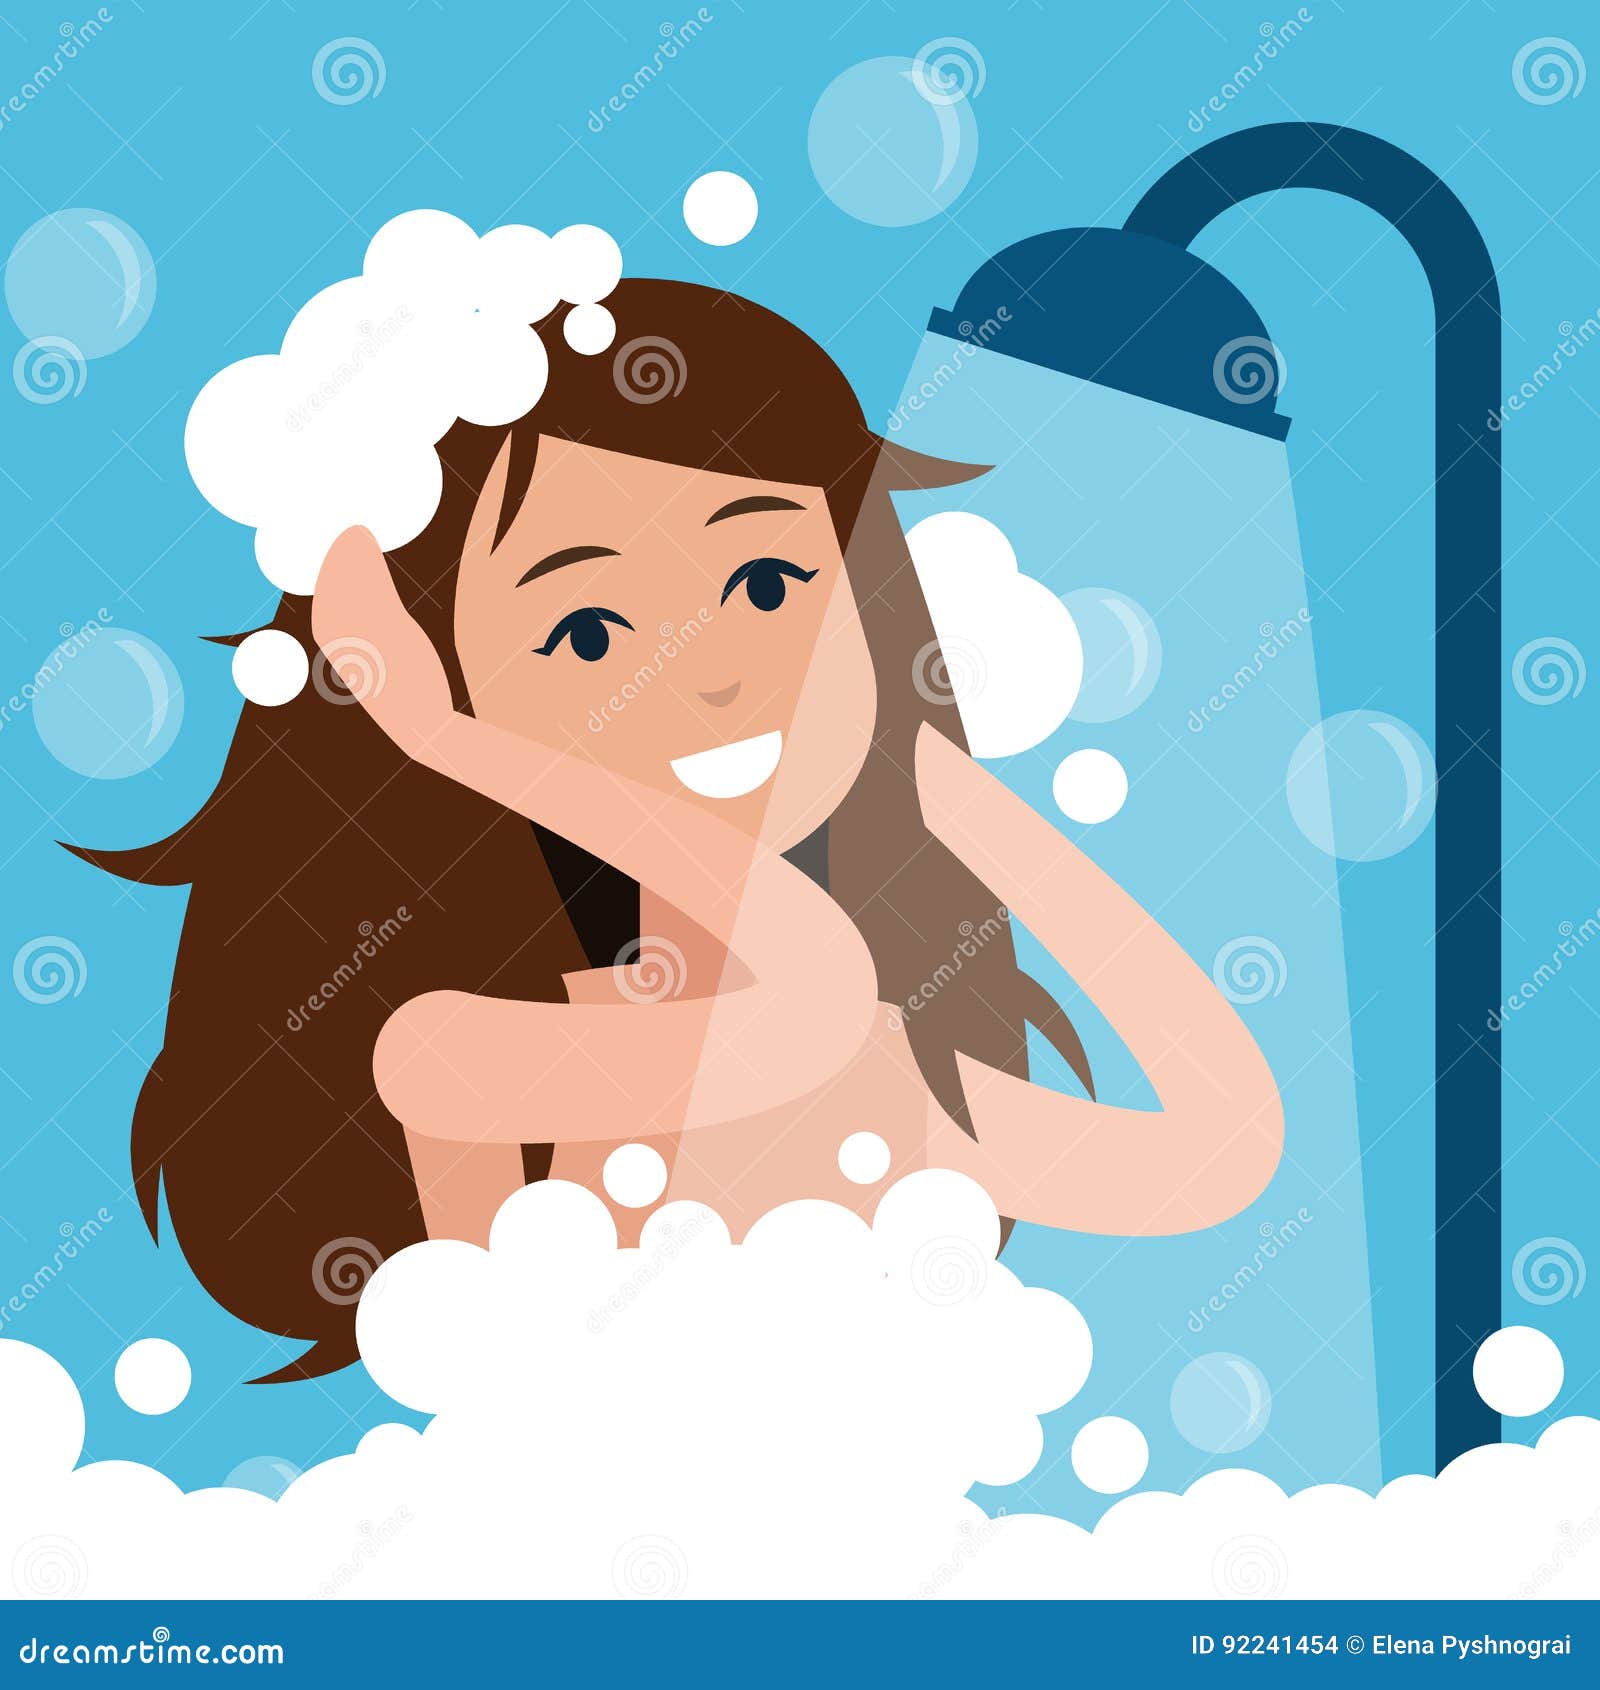 Woman Takes A Shower Stock Vector Illustration Of Pretty 92241454 